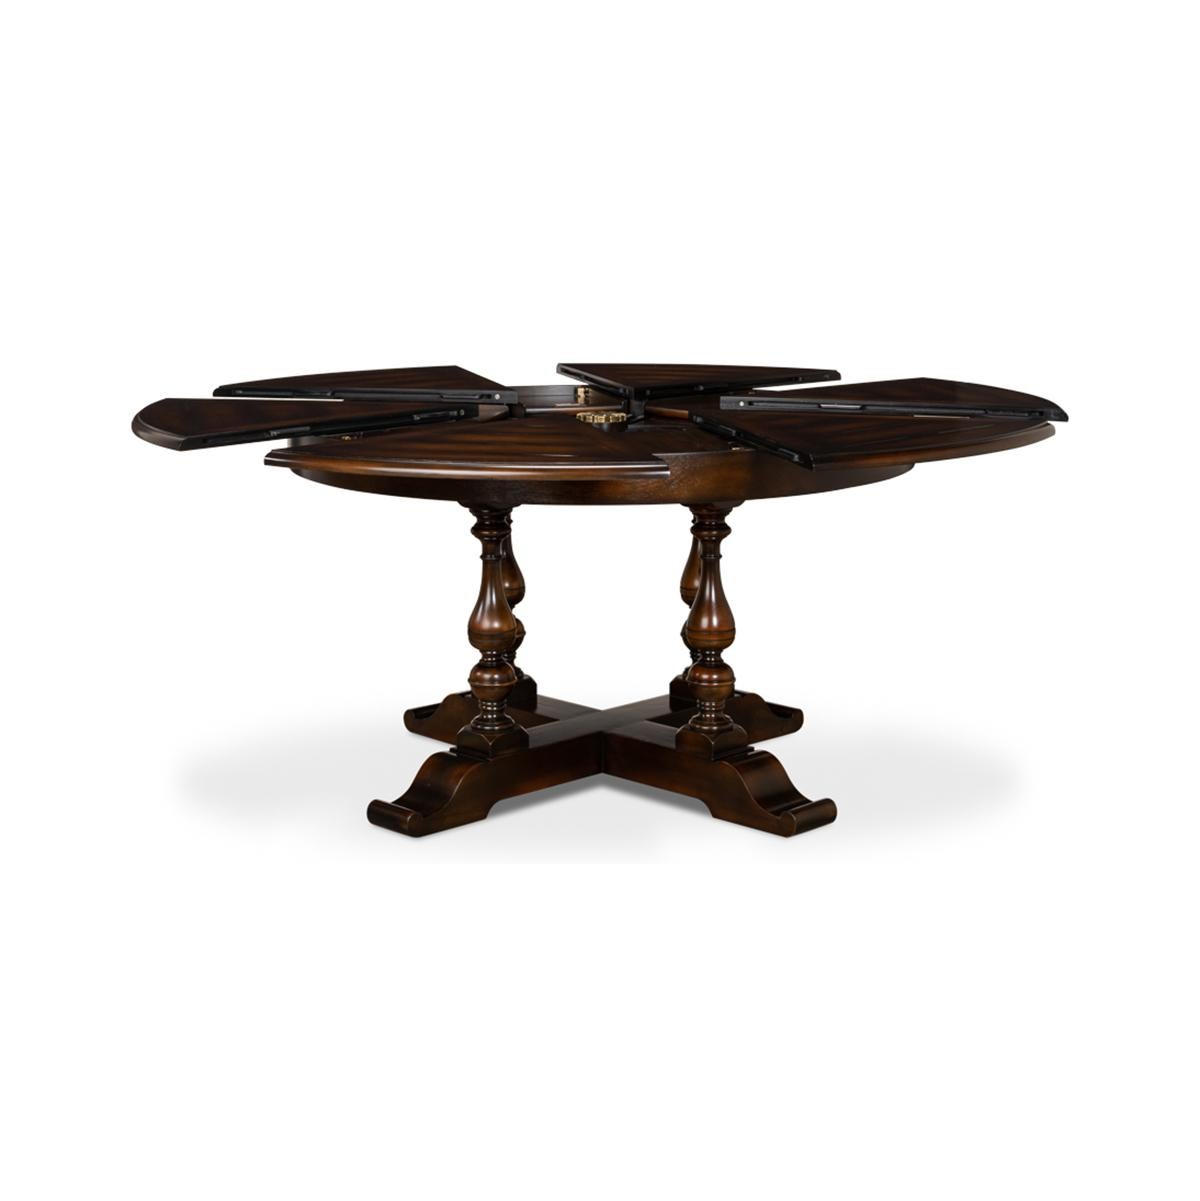 This dining table is veneered in finely figured walnut segments and supported on four baluster form turned legs leading to an 